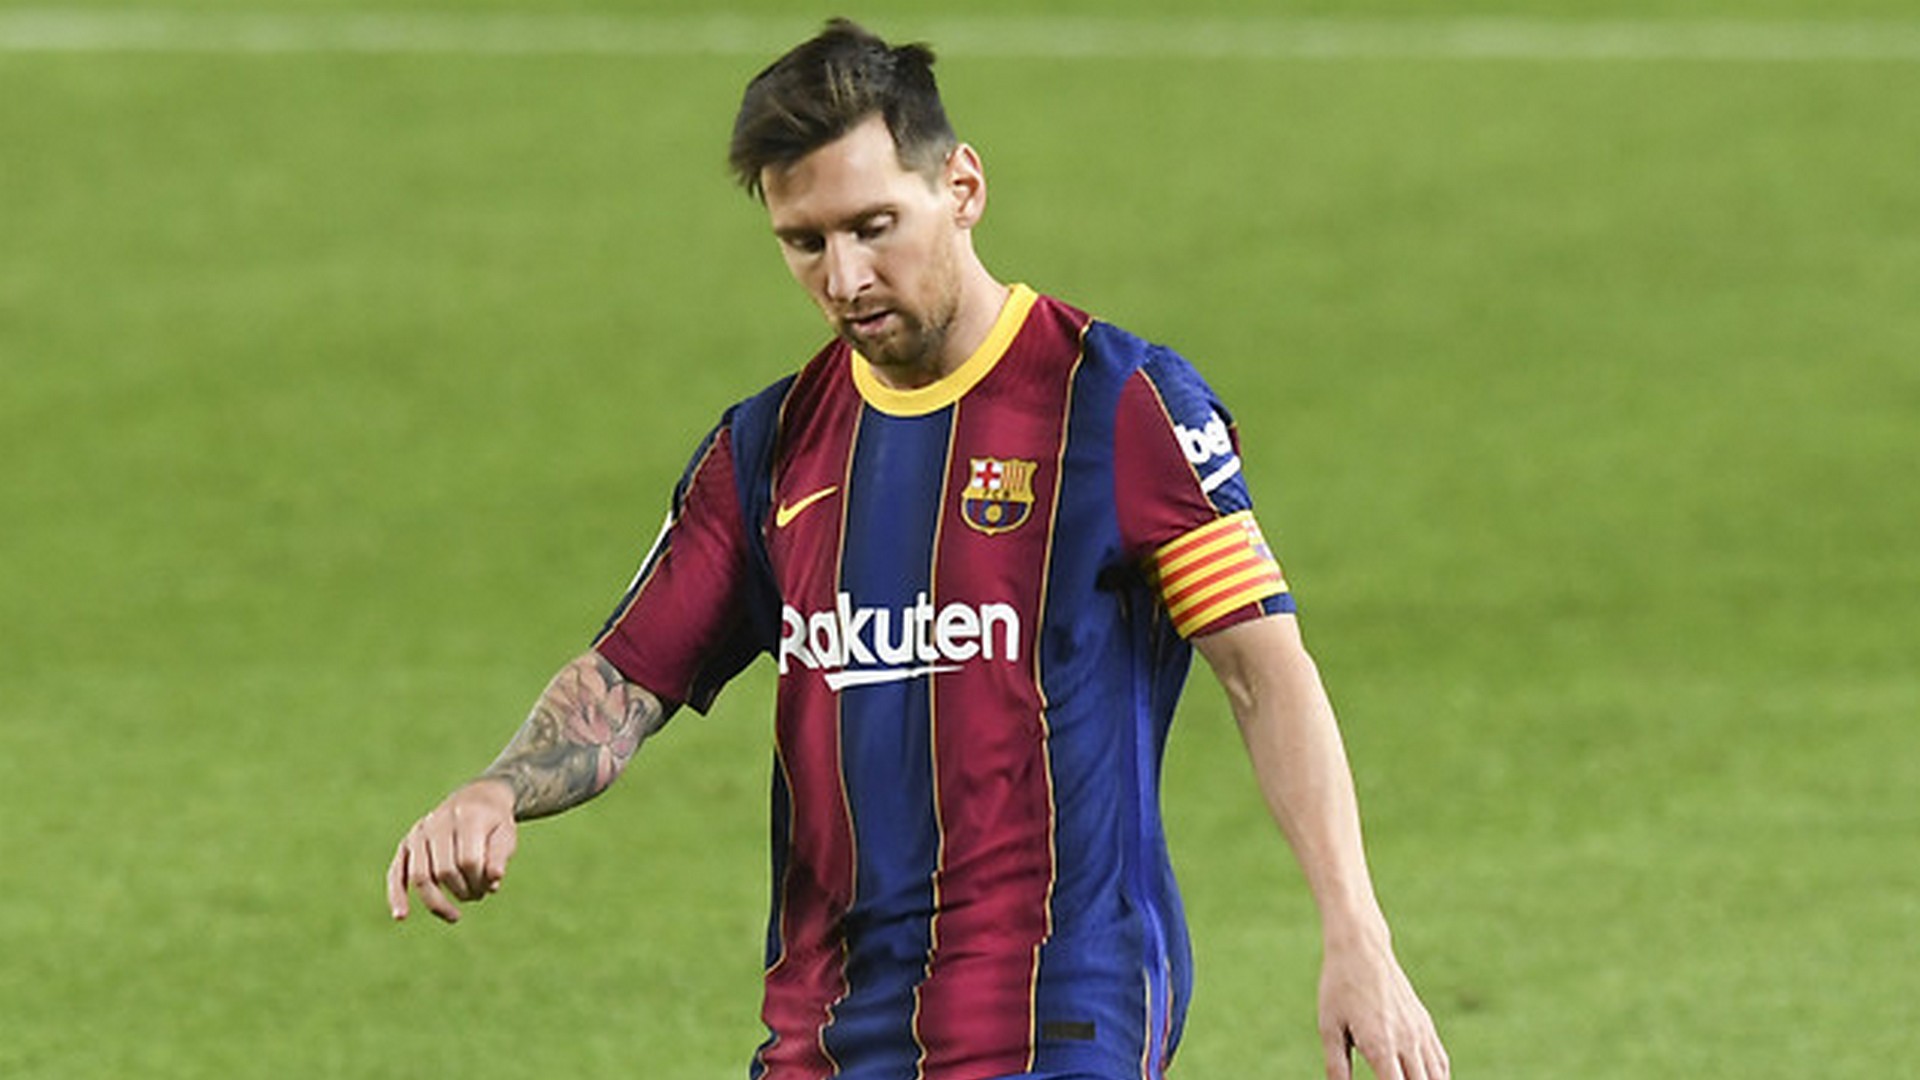 Messi left out of Barcelona's squad for trip to Dynamo Kiev